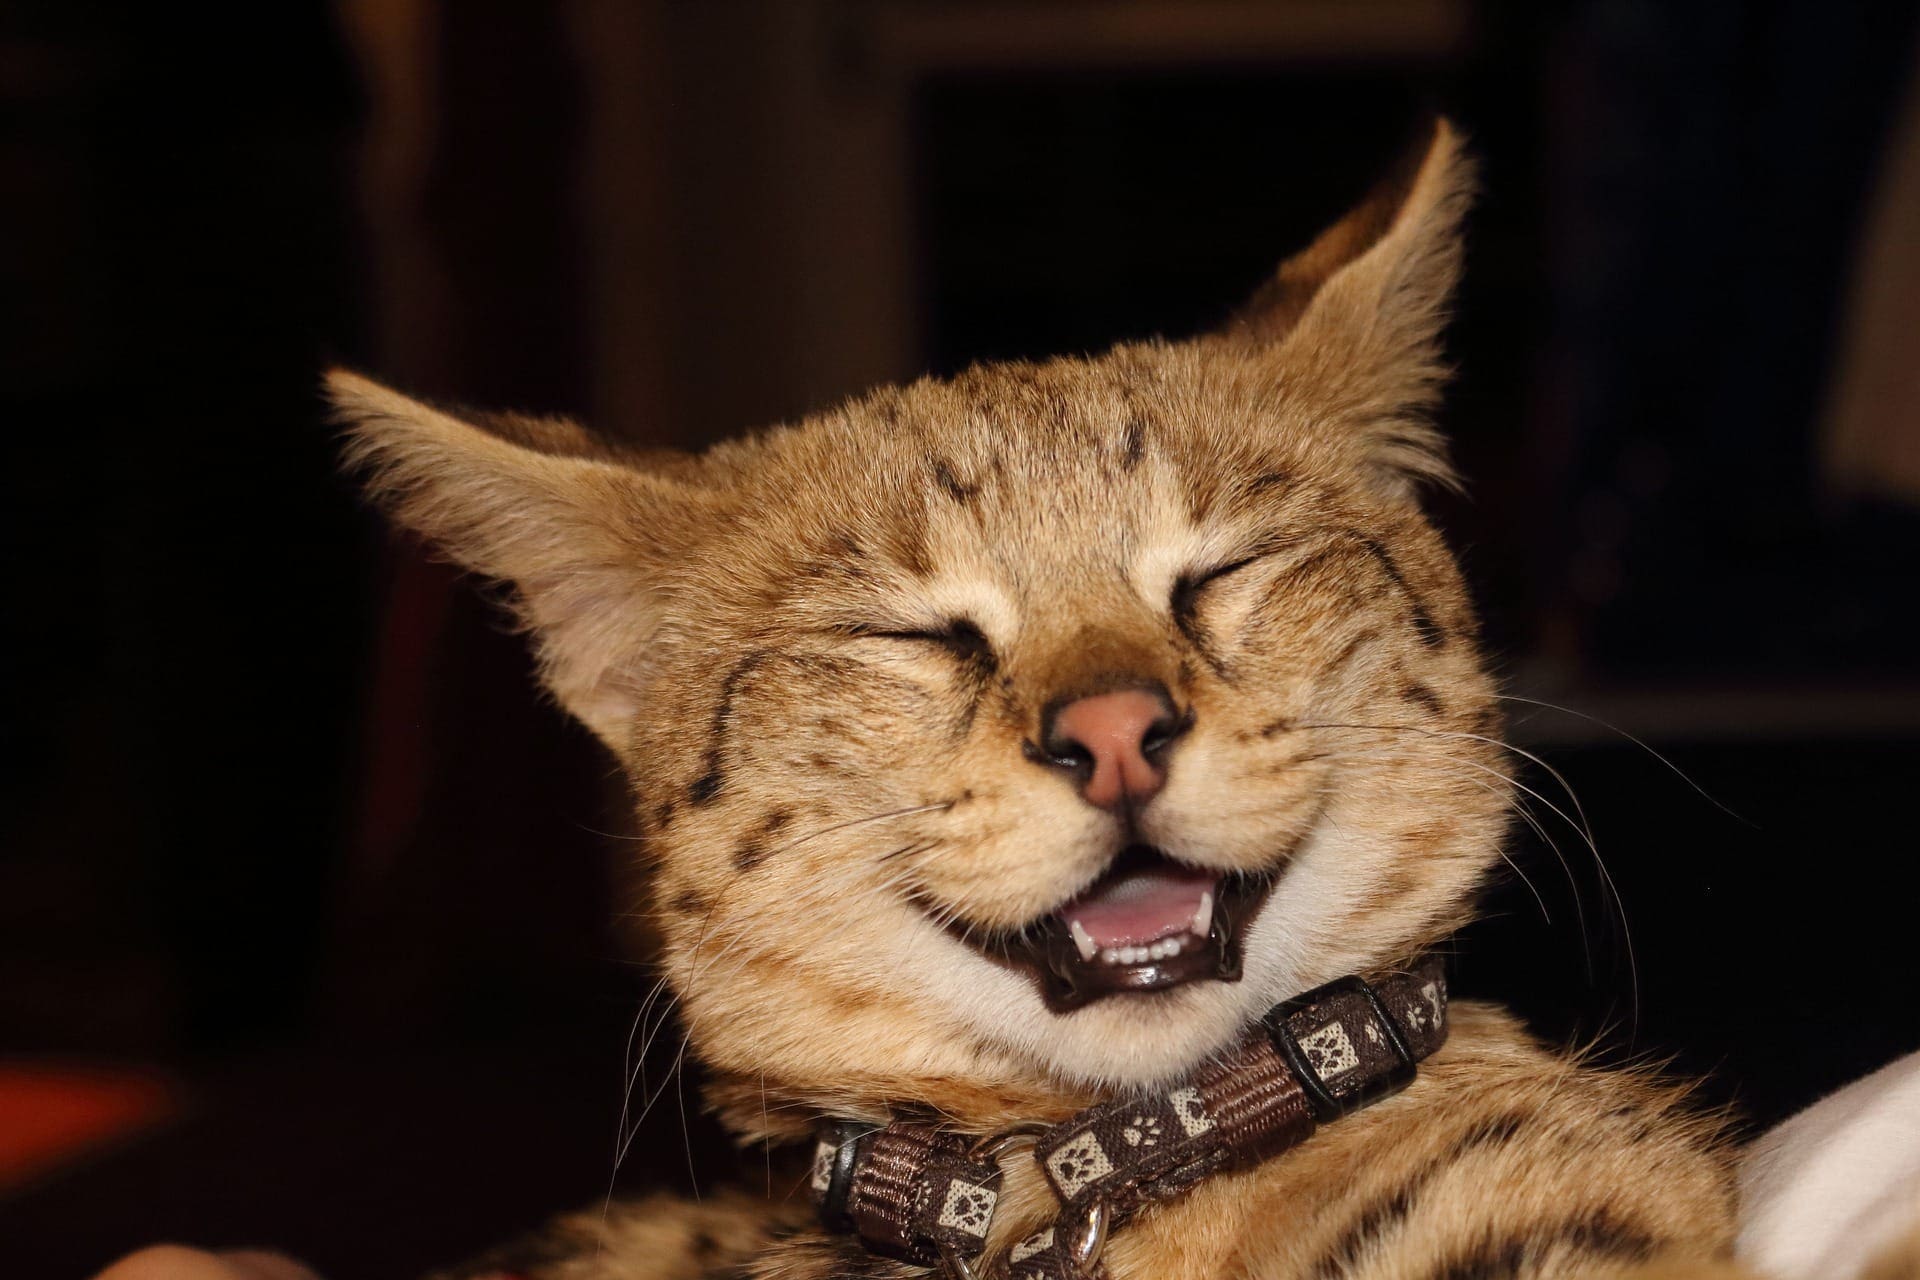 Photo of laughing cat by v10g for Pixabay